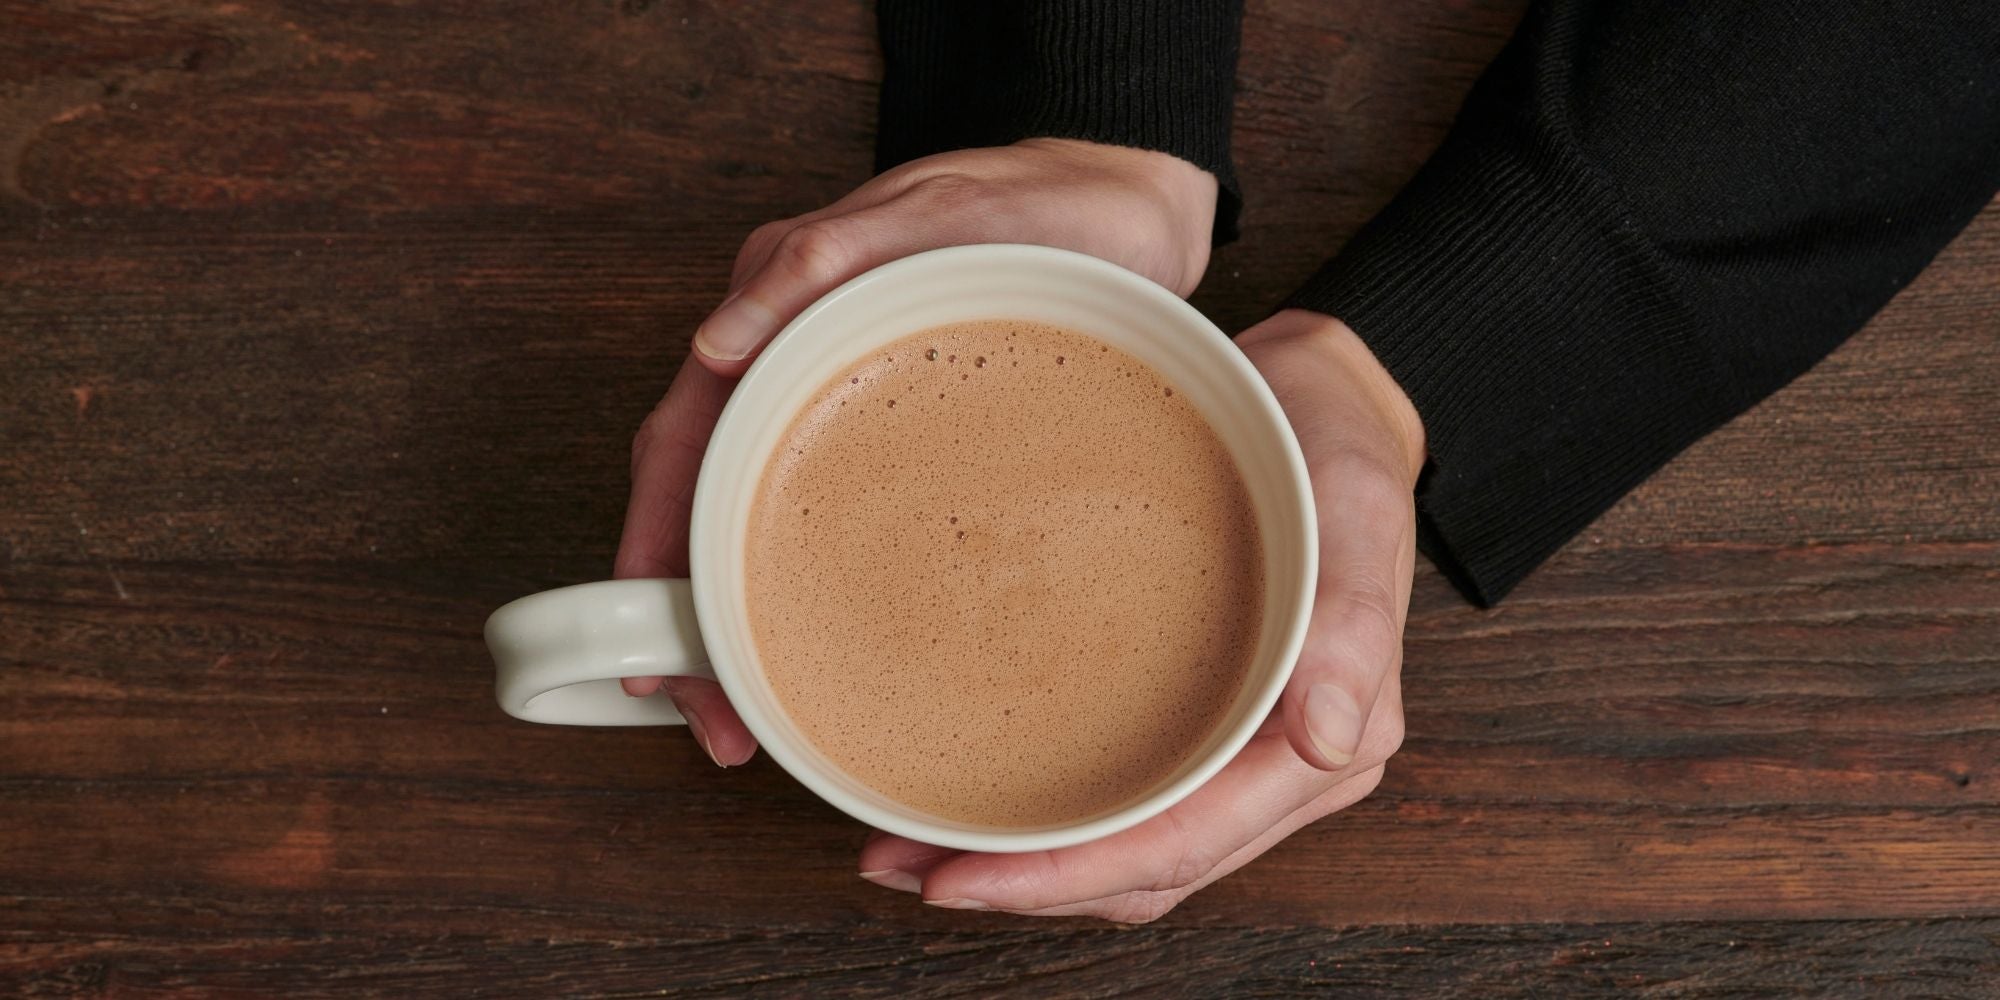 Hands holding hot chocolate in a mug